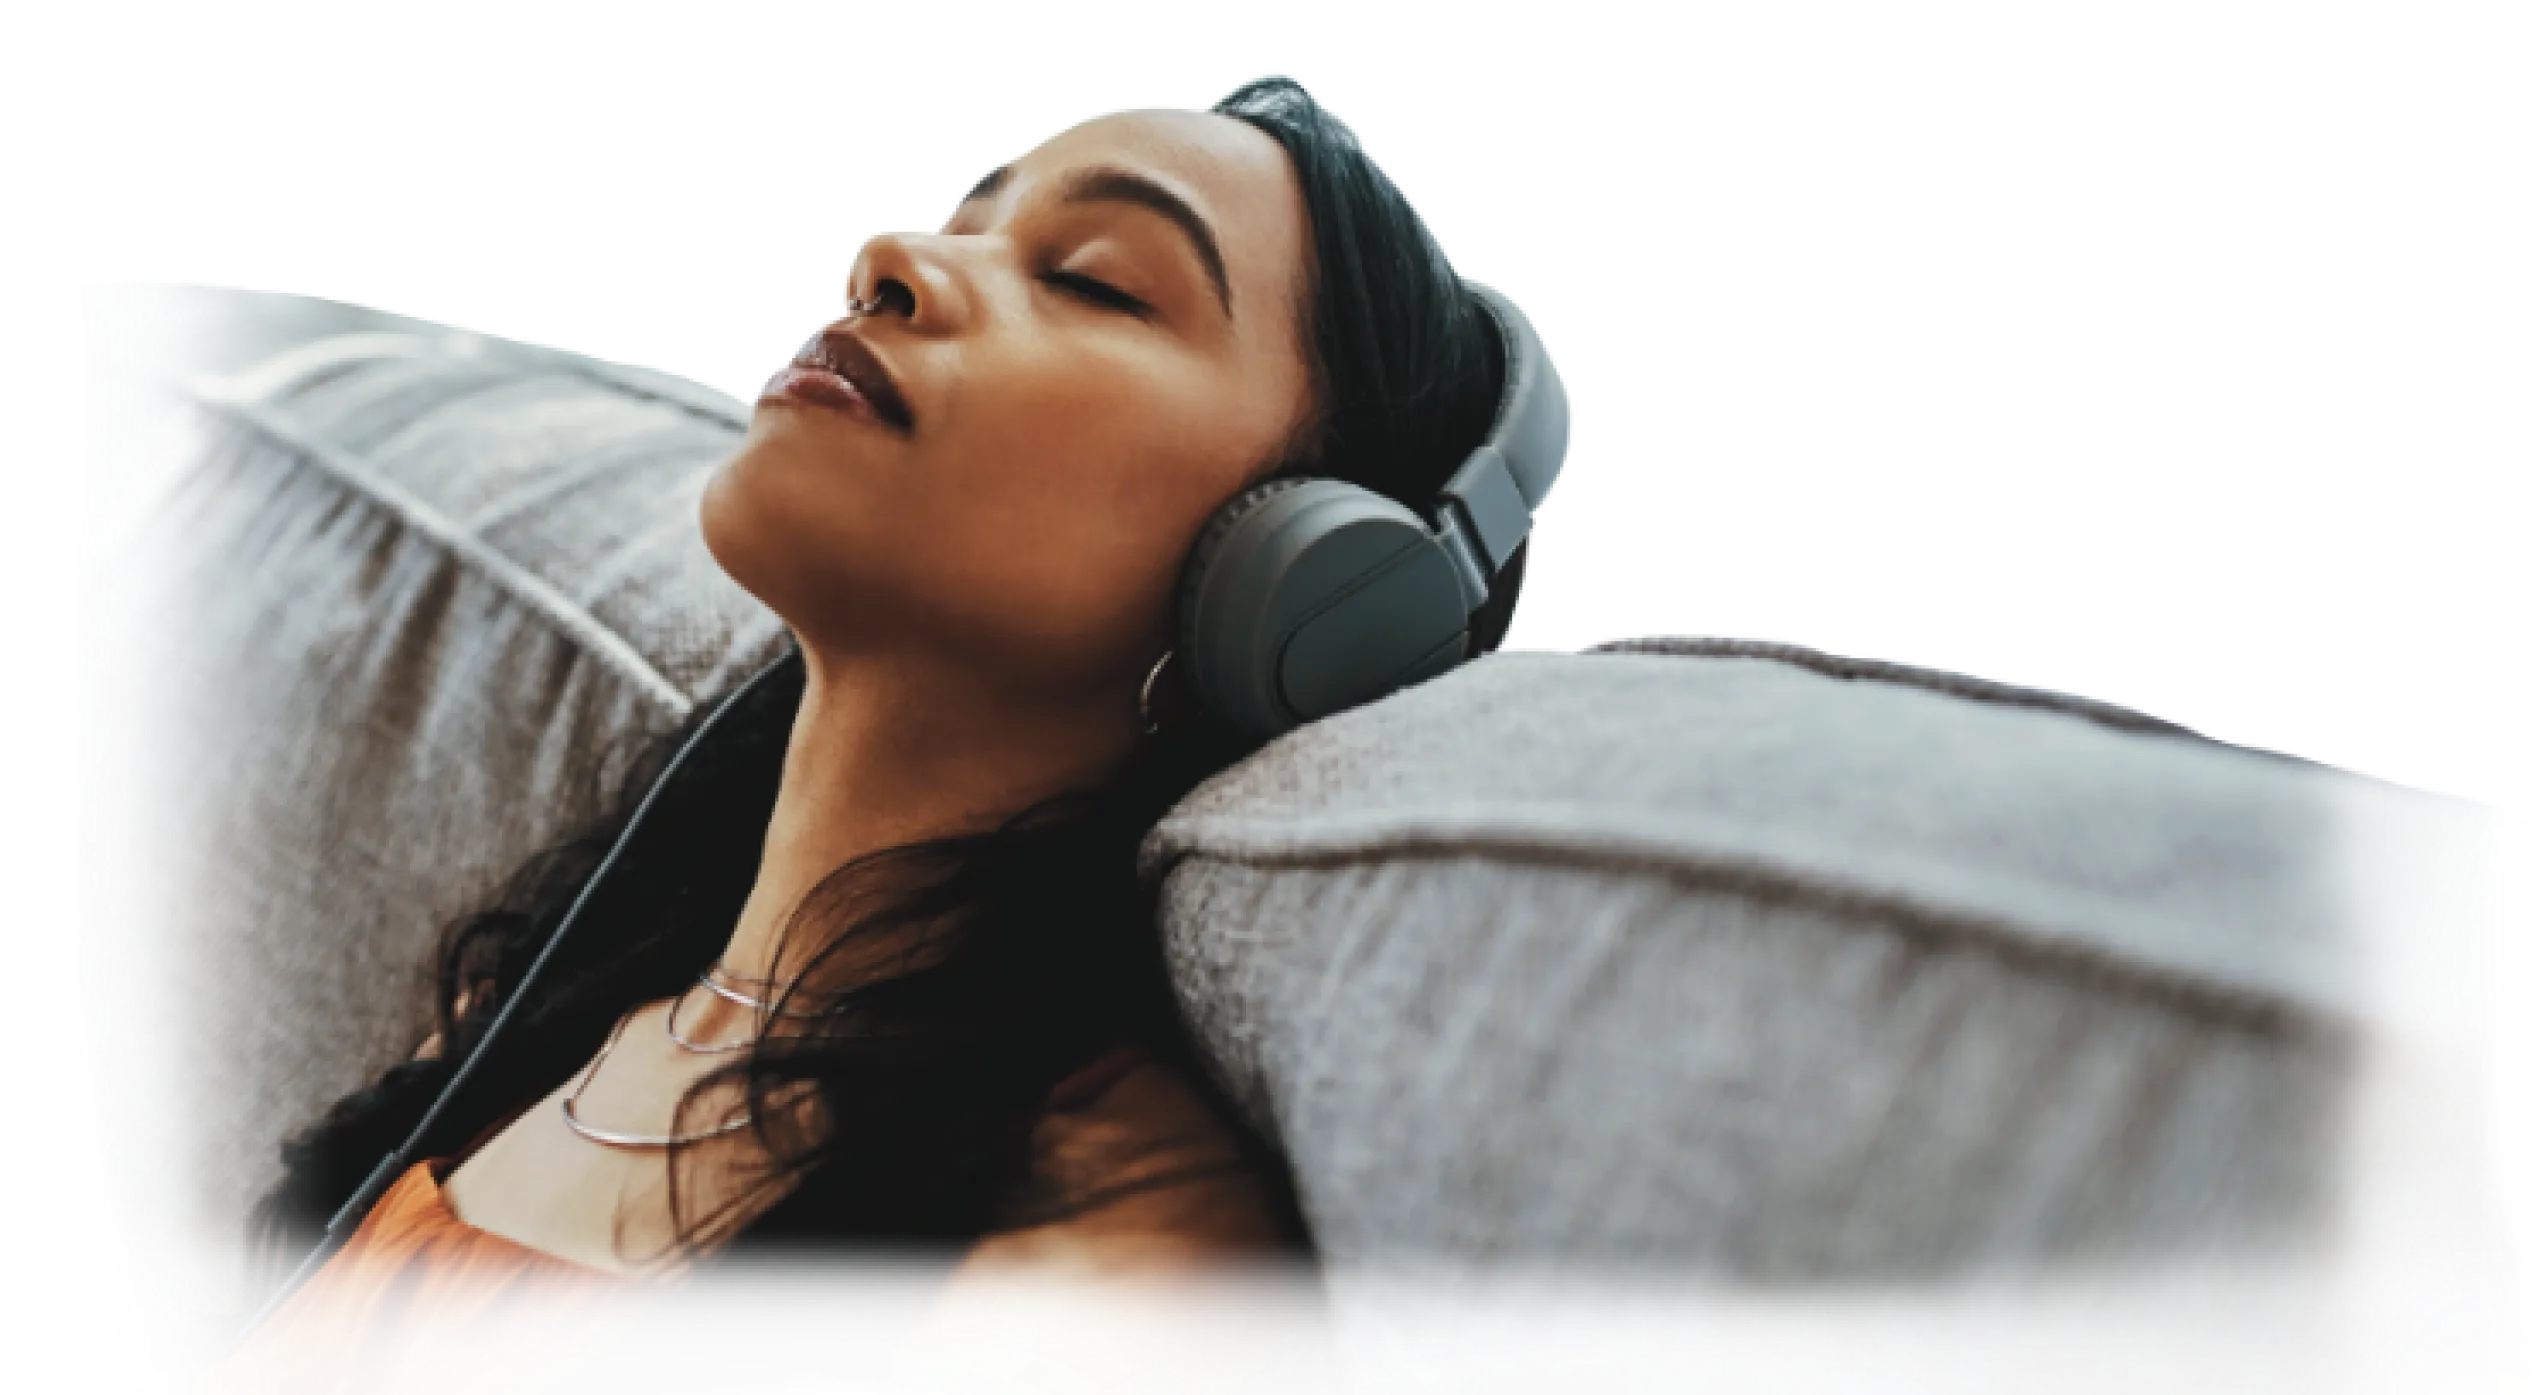 A person relaxing on a couch listening to music on headphones